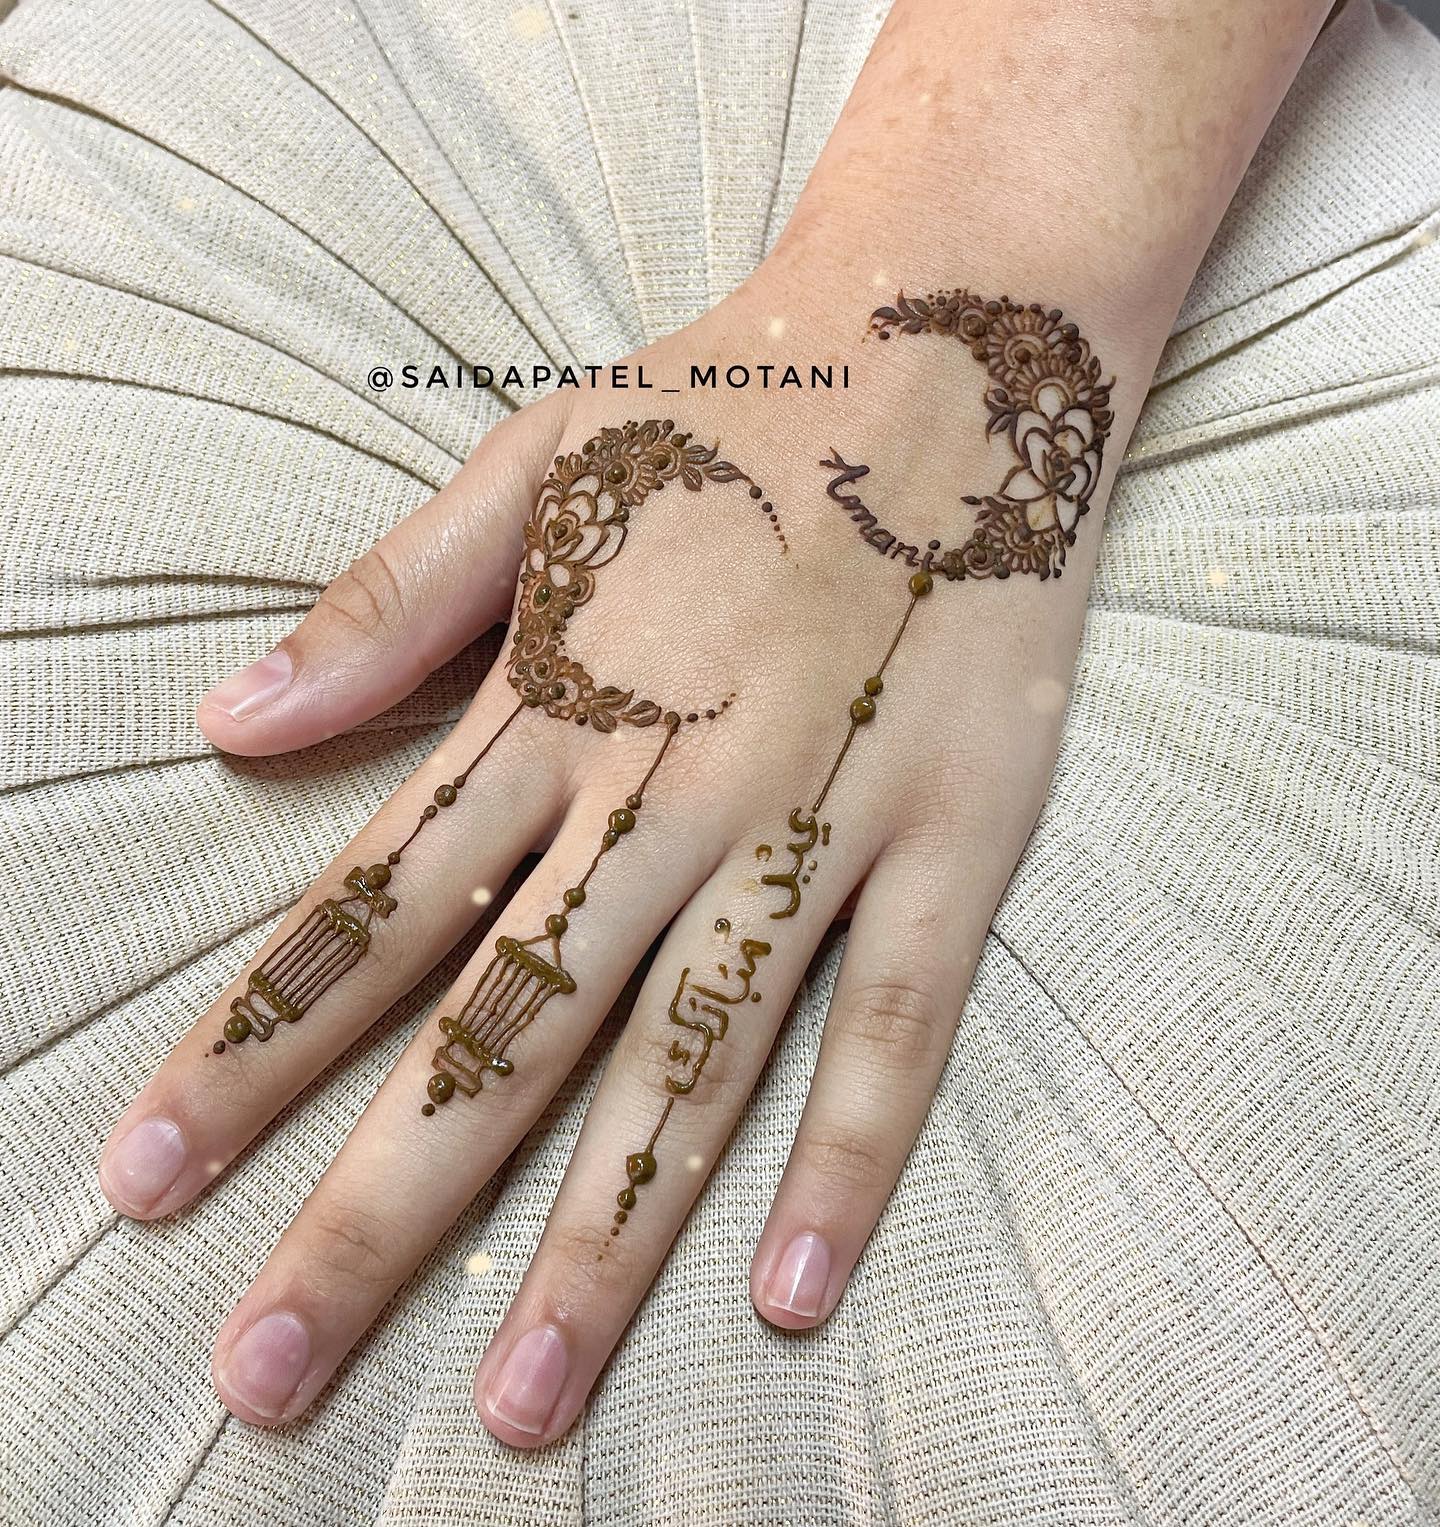 Find The Best New Eid Mehndi Designs 2021 At Affordable